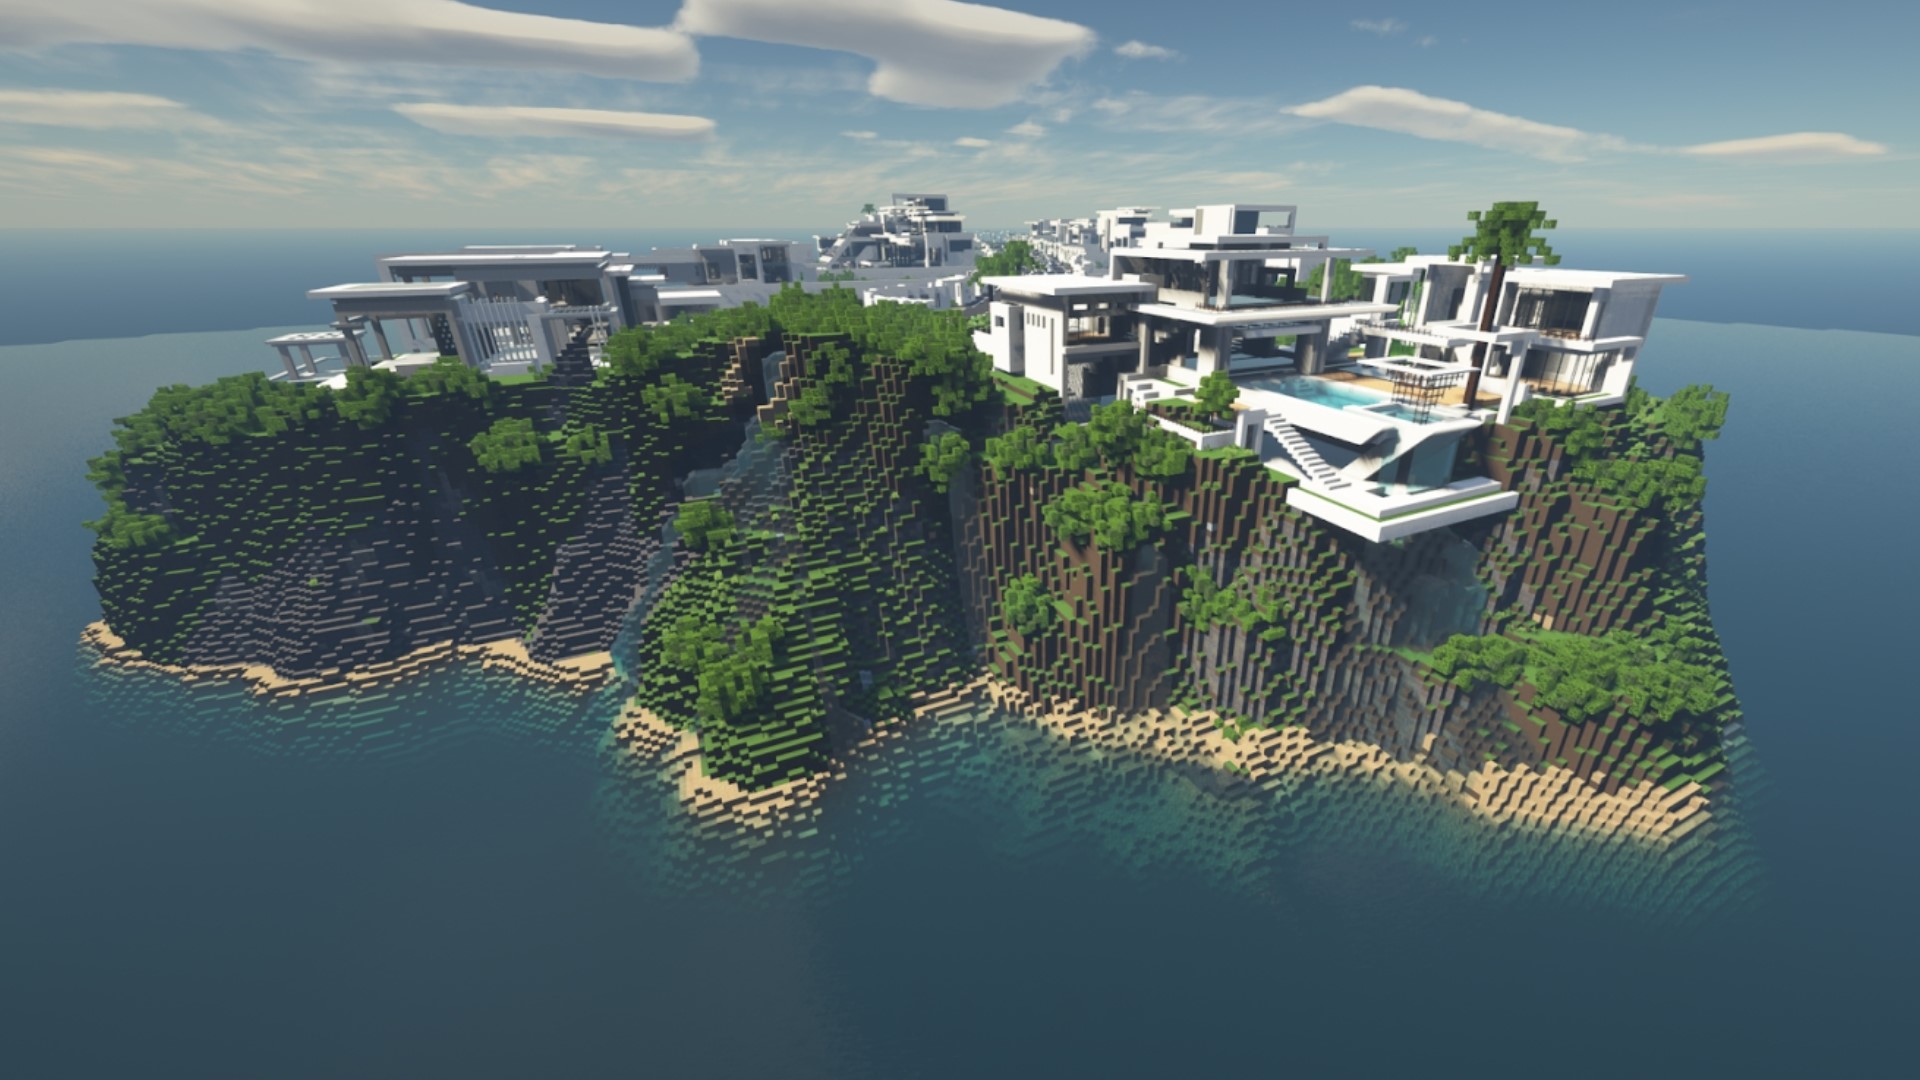 Entrepreneur Adam Hollander launched White Sands, a tropical island getaway in the metaverse that people can call home.